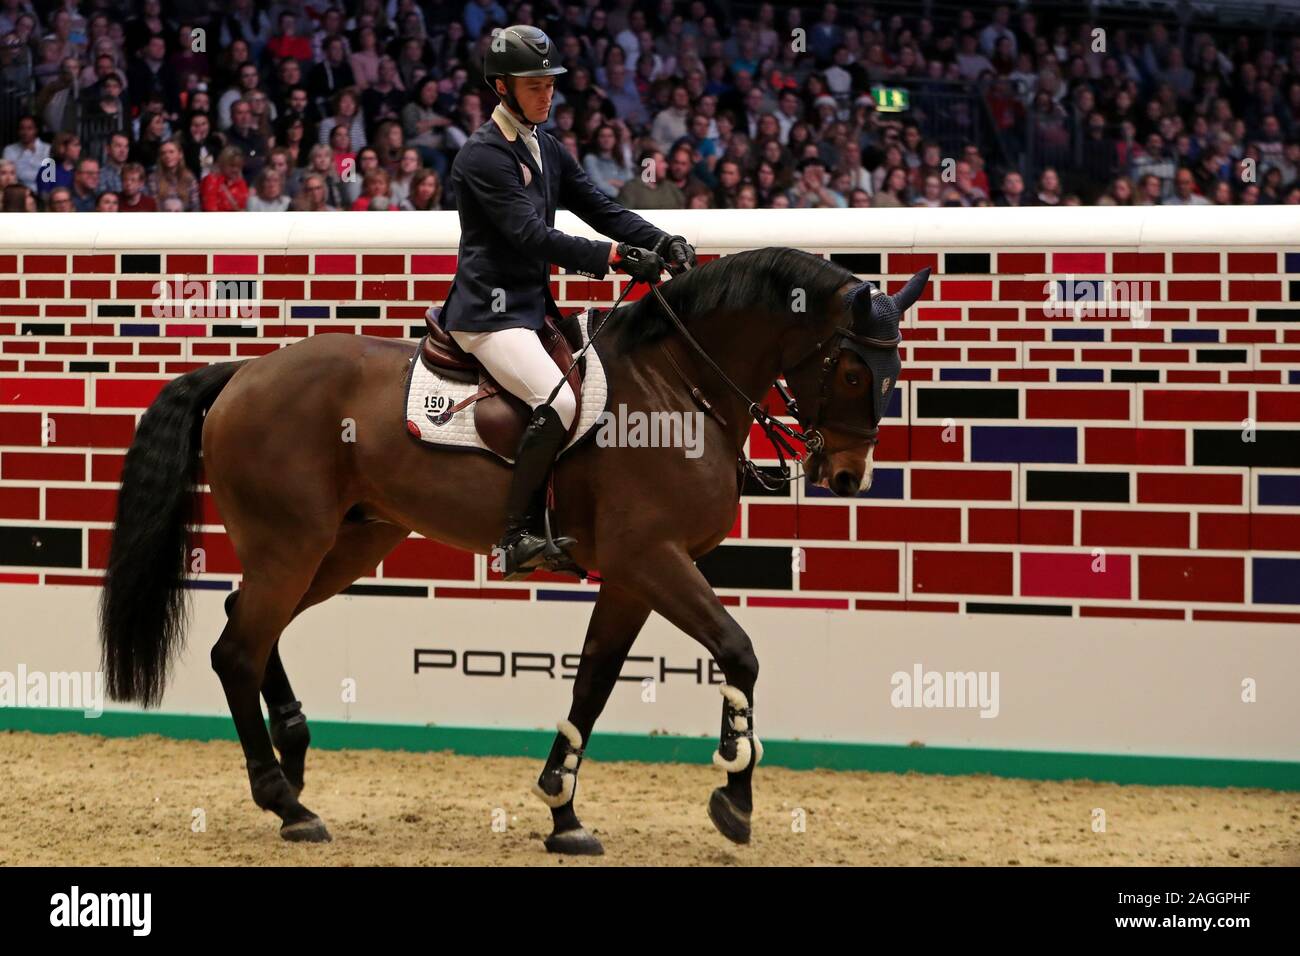 LONDON, ENGLAND - DECEMBER 18TH William Whitaker riding RMF Charly during the Cayenne Puissance Event at the International Horse Show at Olympia, London on Wednesday 18th December 2019. (Credit: Jon Bromley | MI News) Stock Photo